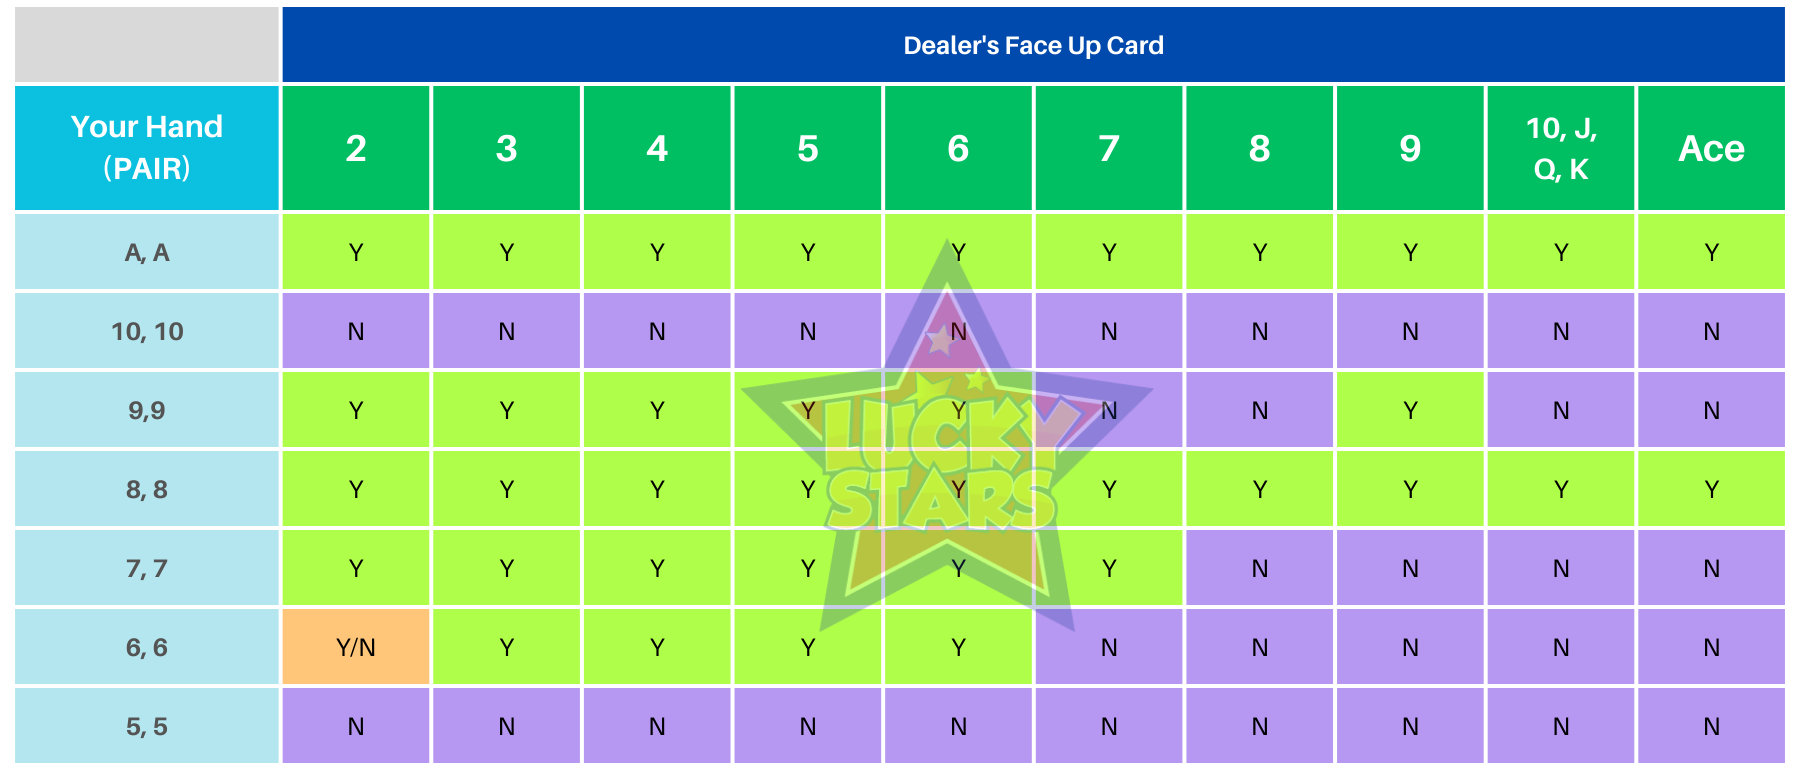 Dealers Face-Up Card table 3